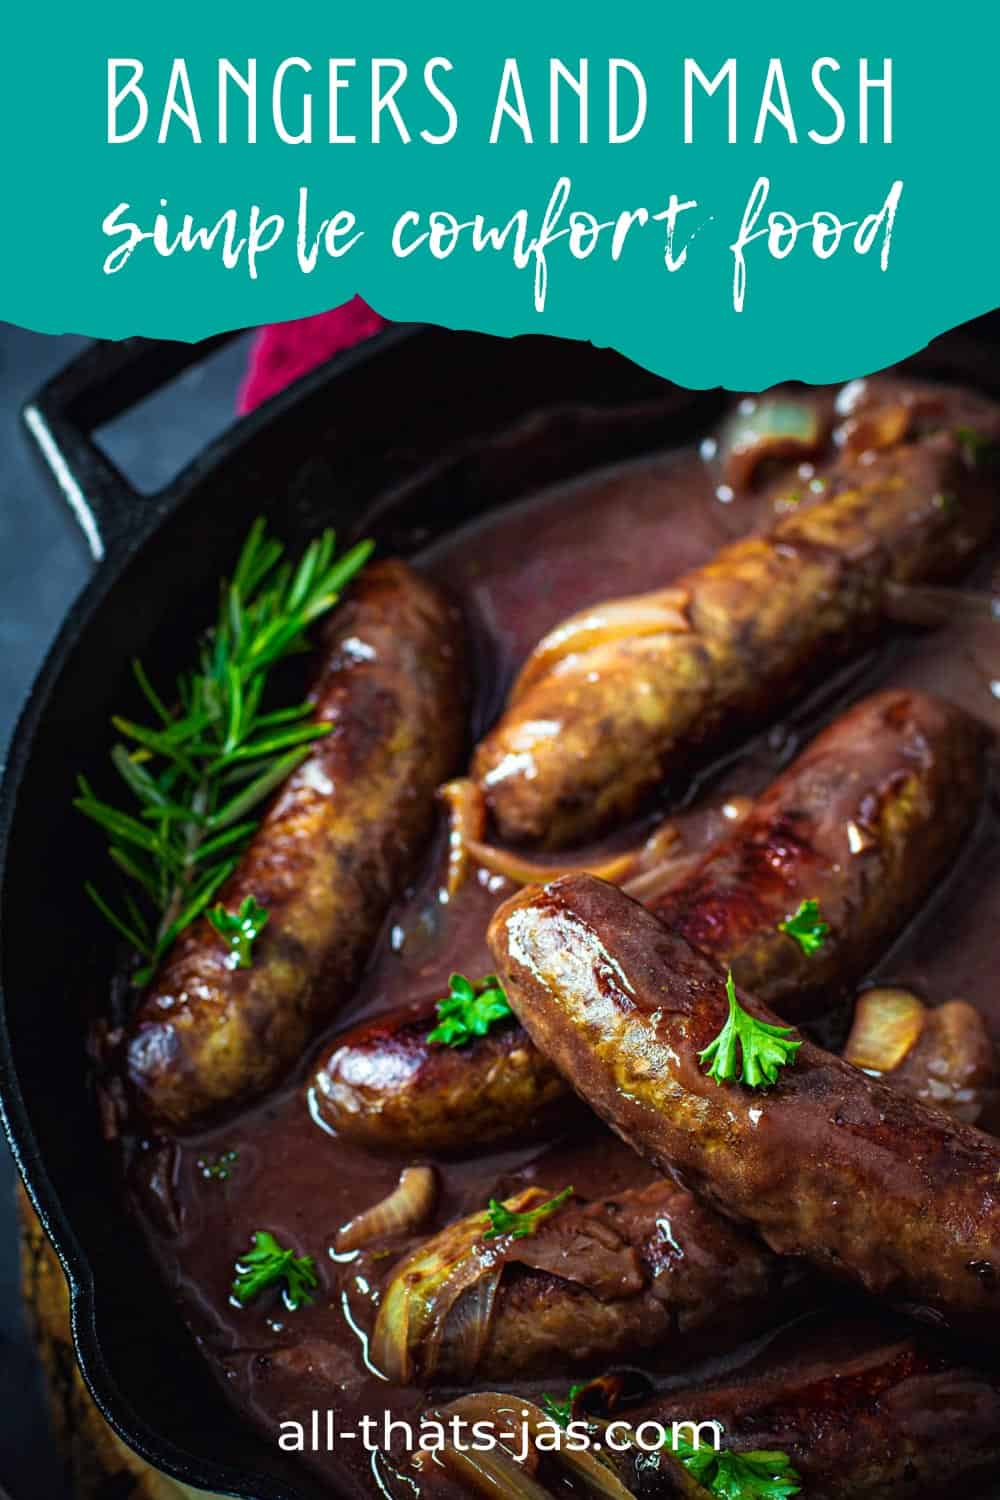 British sausages drenched in wine and onion gravy with text overlay.